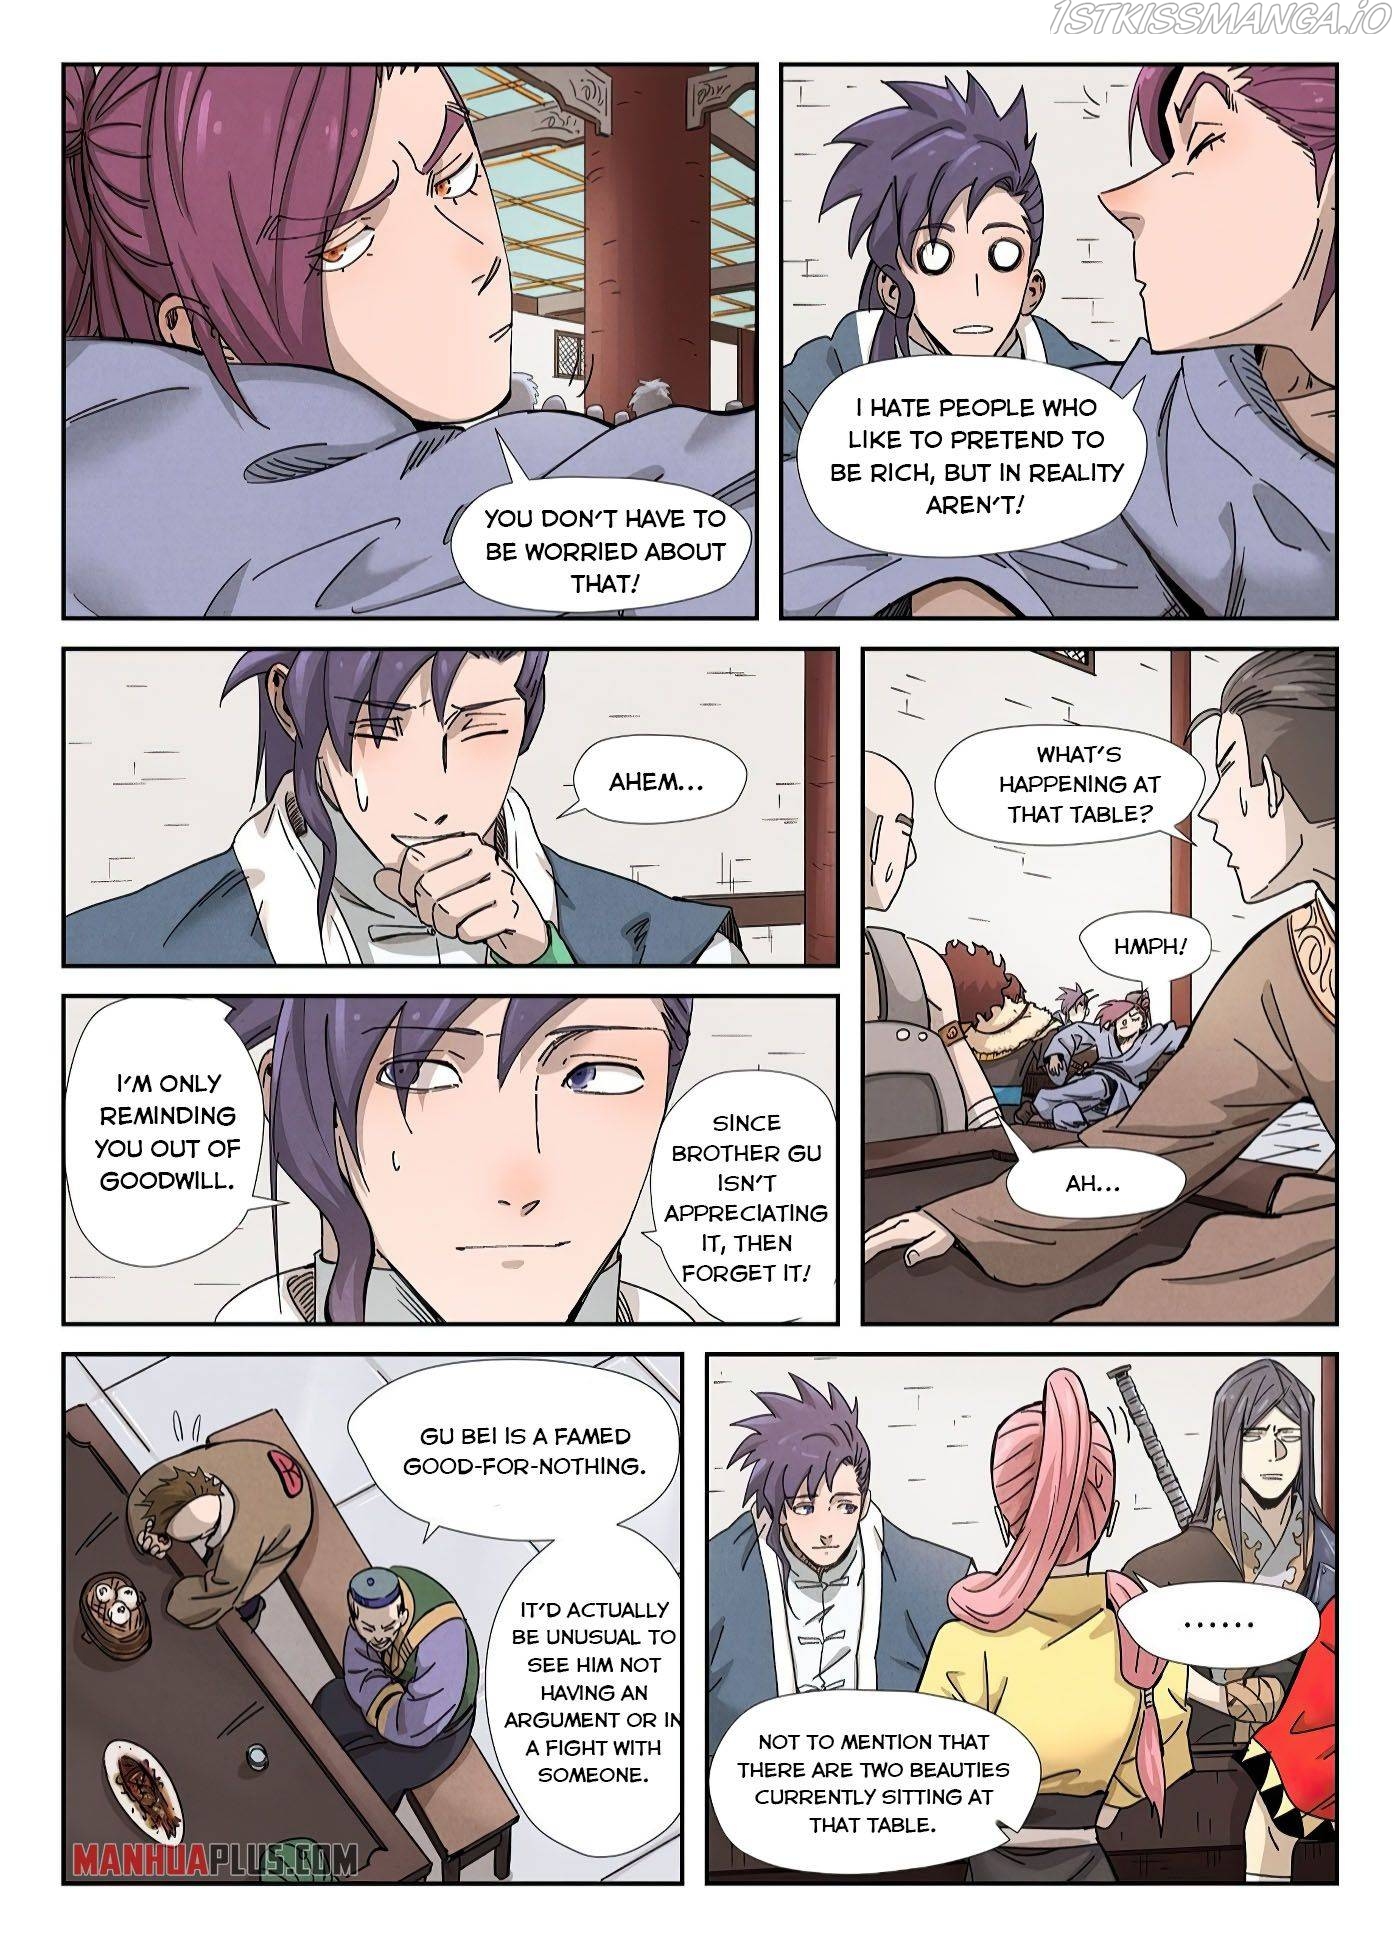 Tales of Demons and Gods Manhua Chapter 336.6 - Page 6